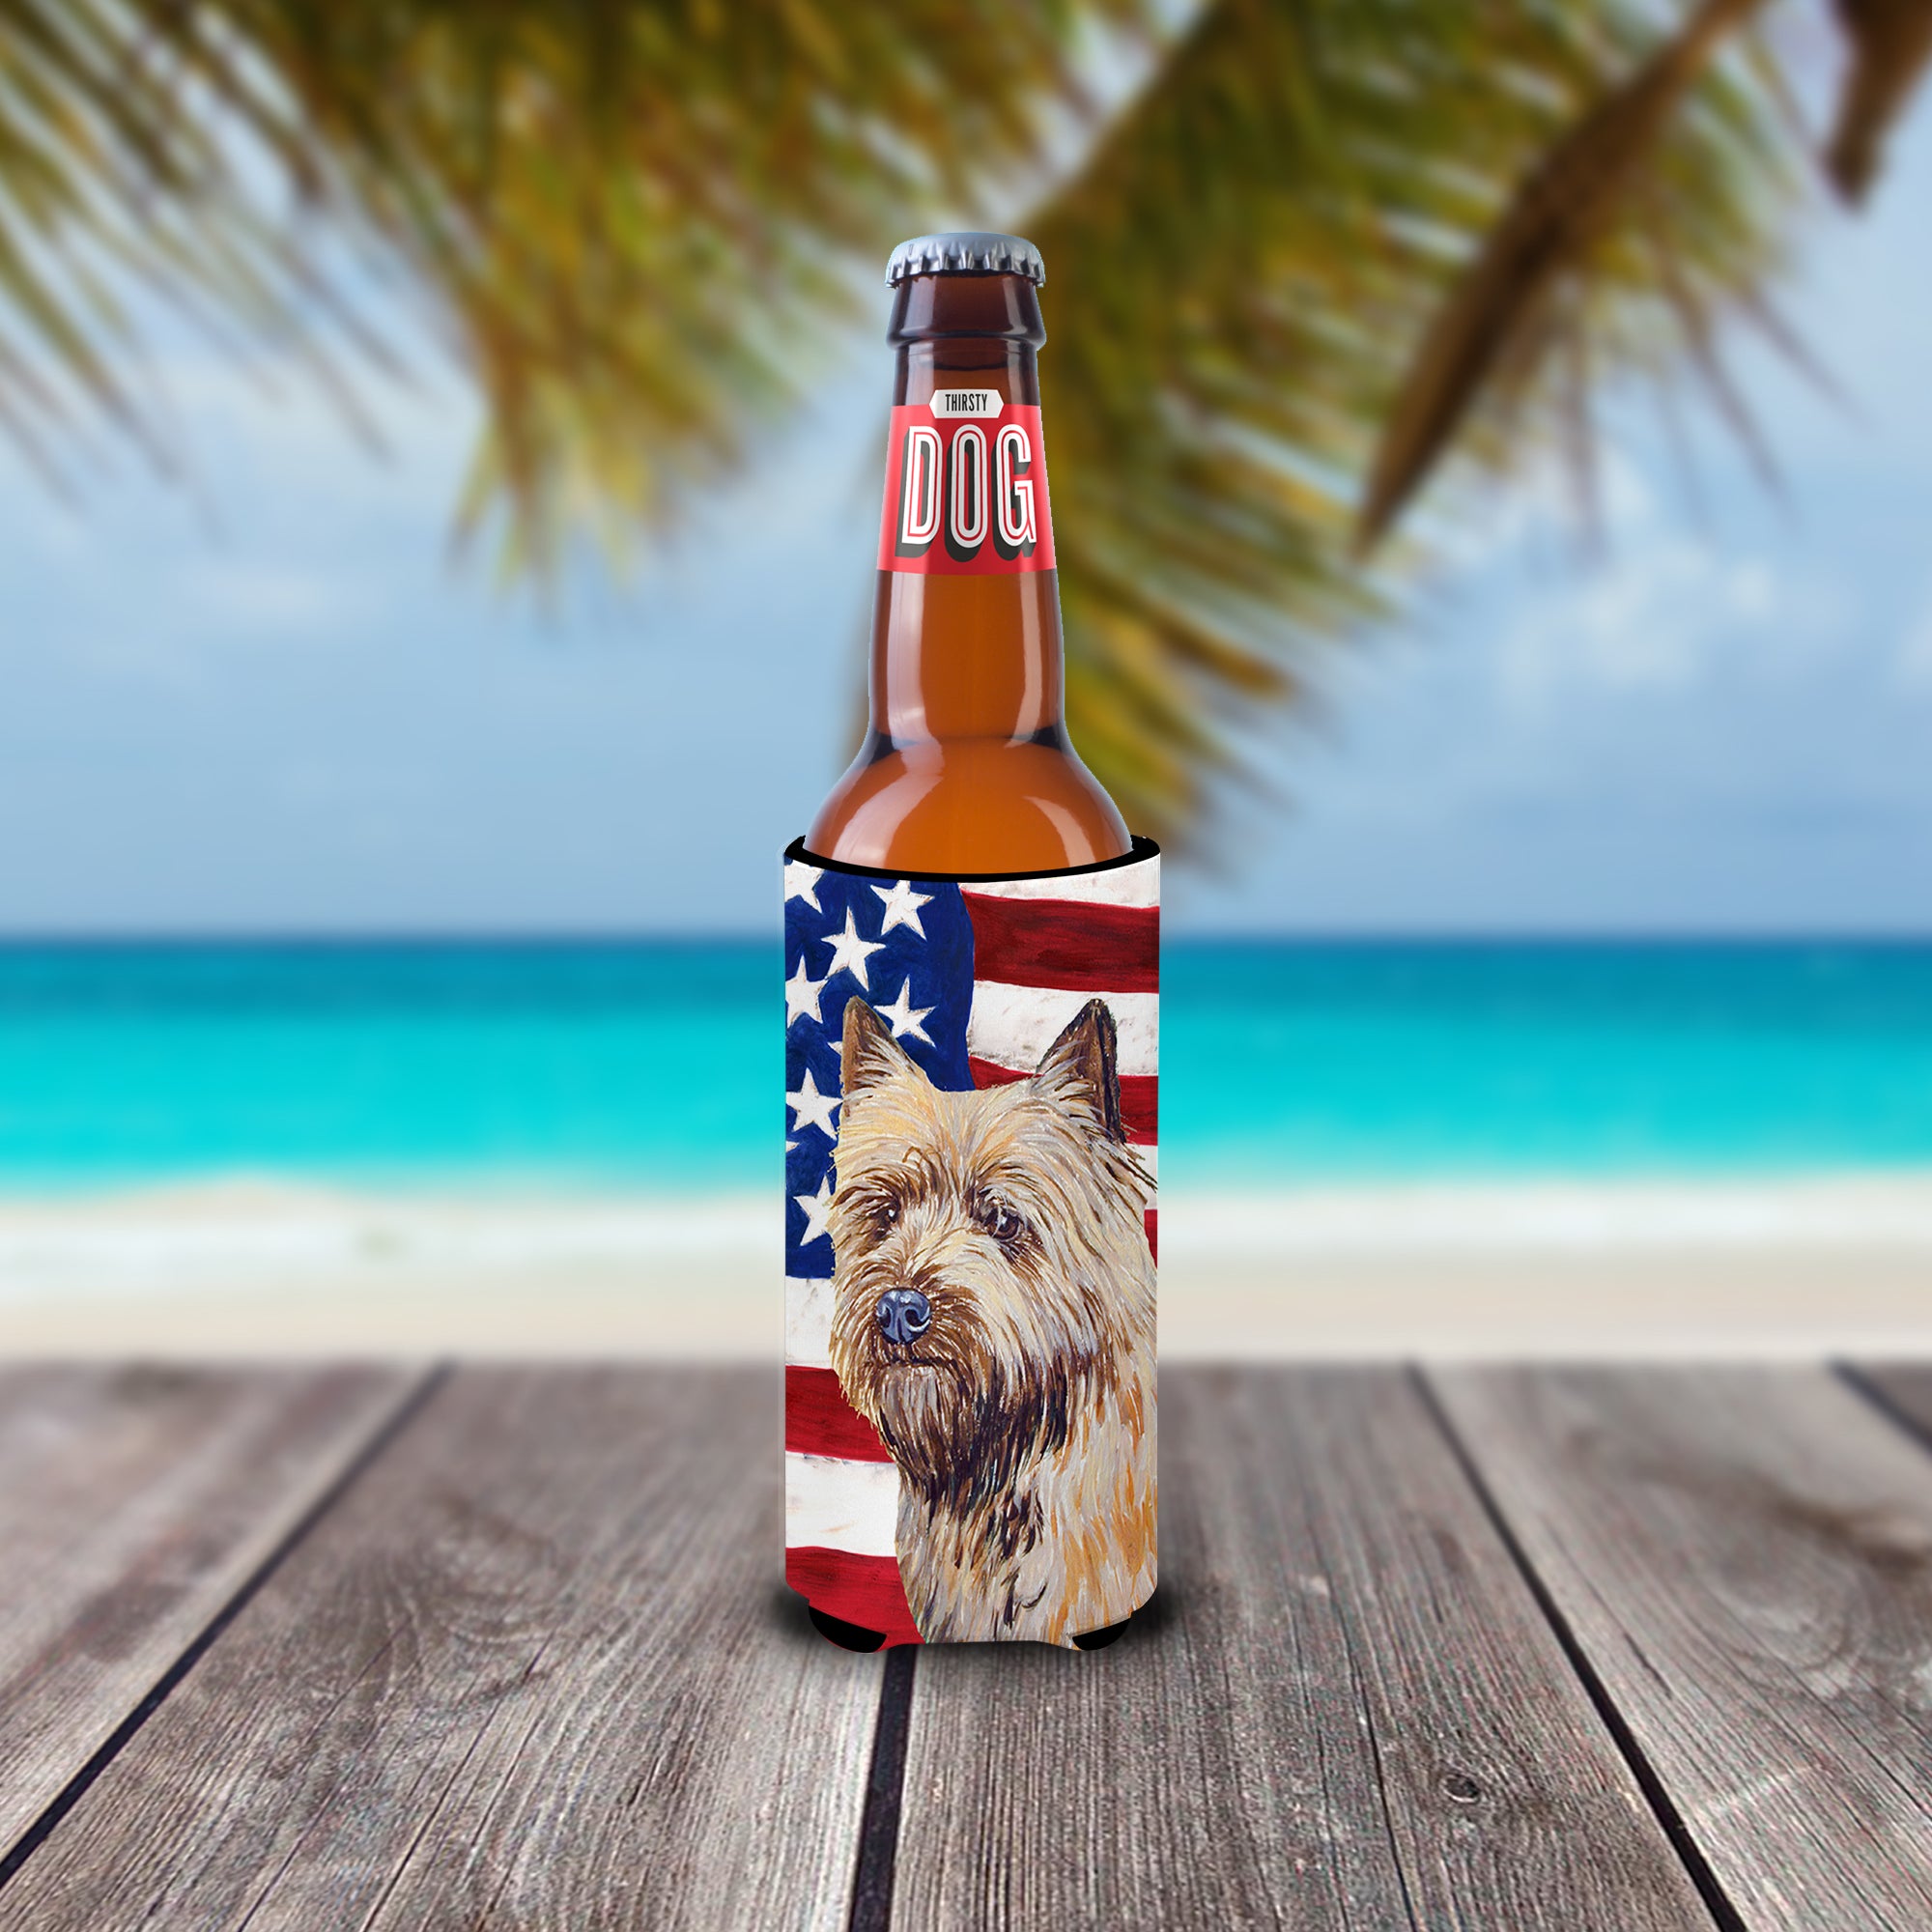 USA American Flag with Cairn Terrier Ultra Beverage Insulators for slim cans LH9020MUK